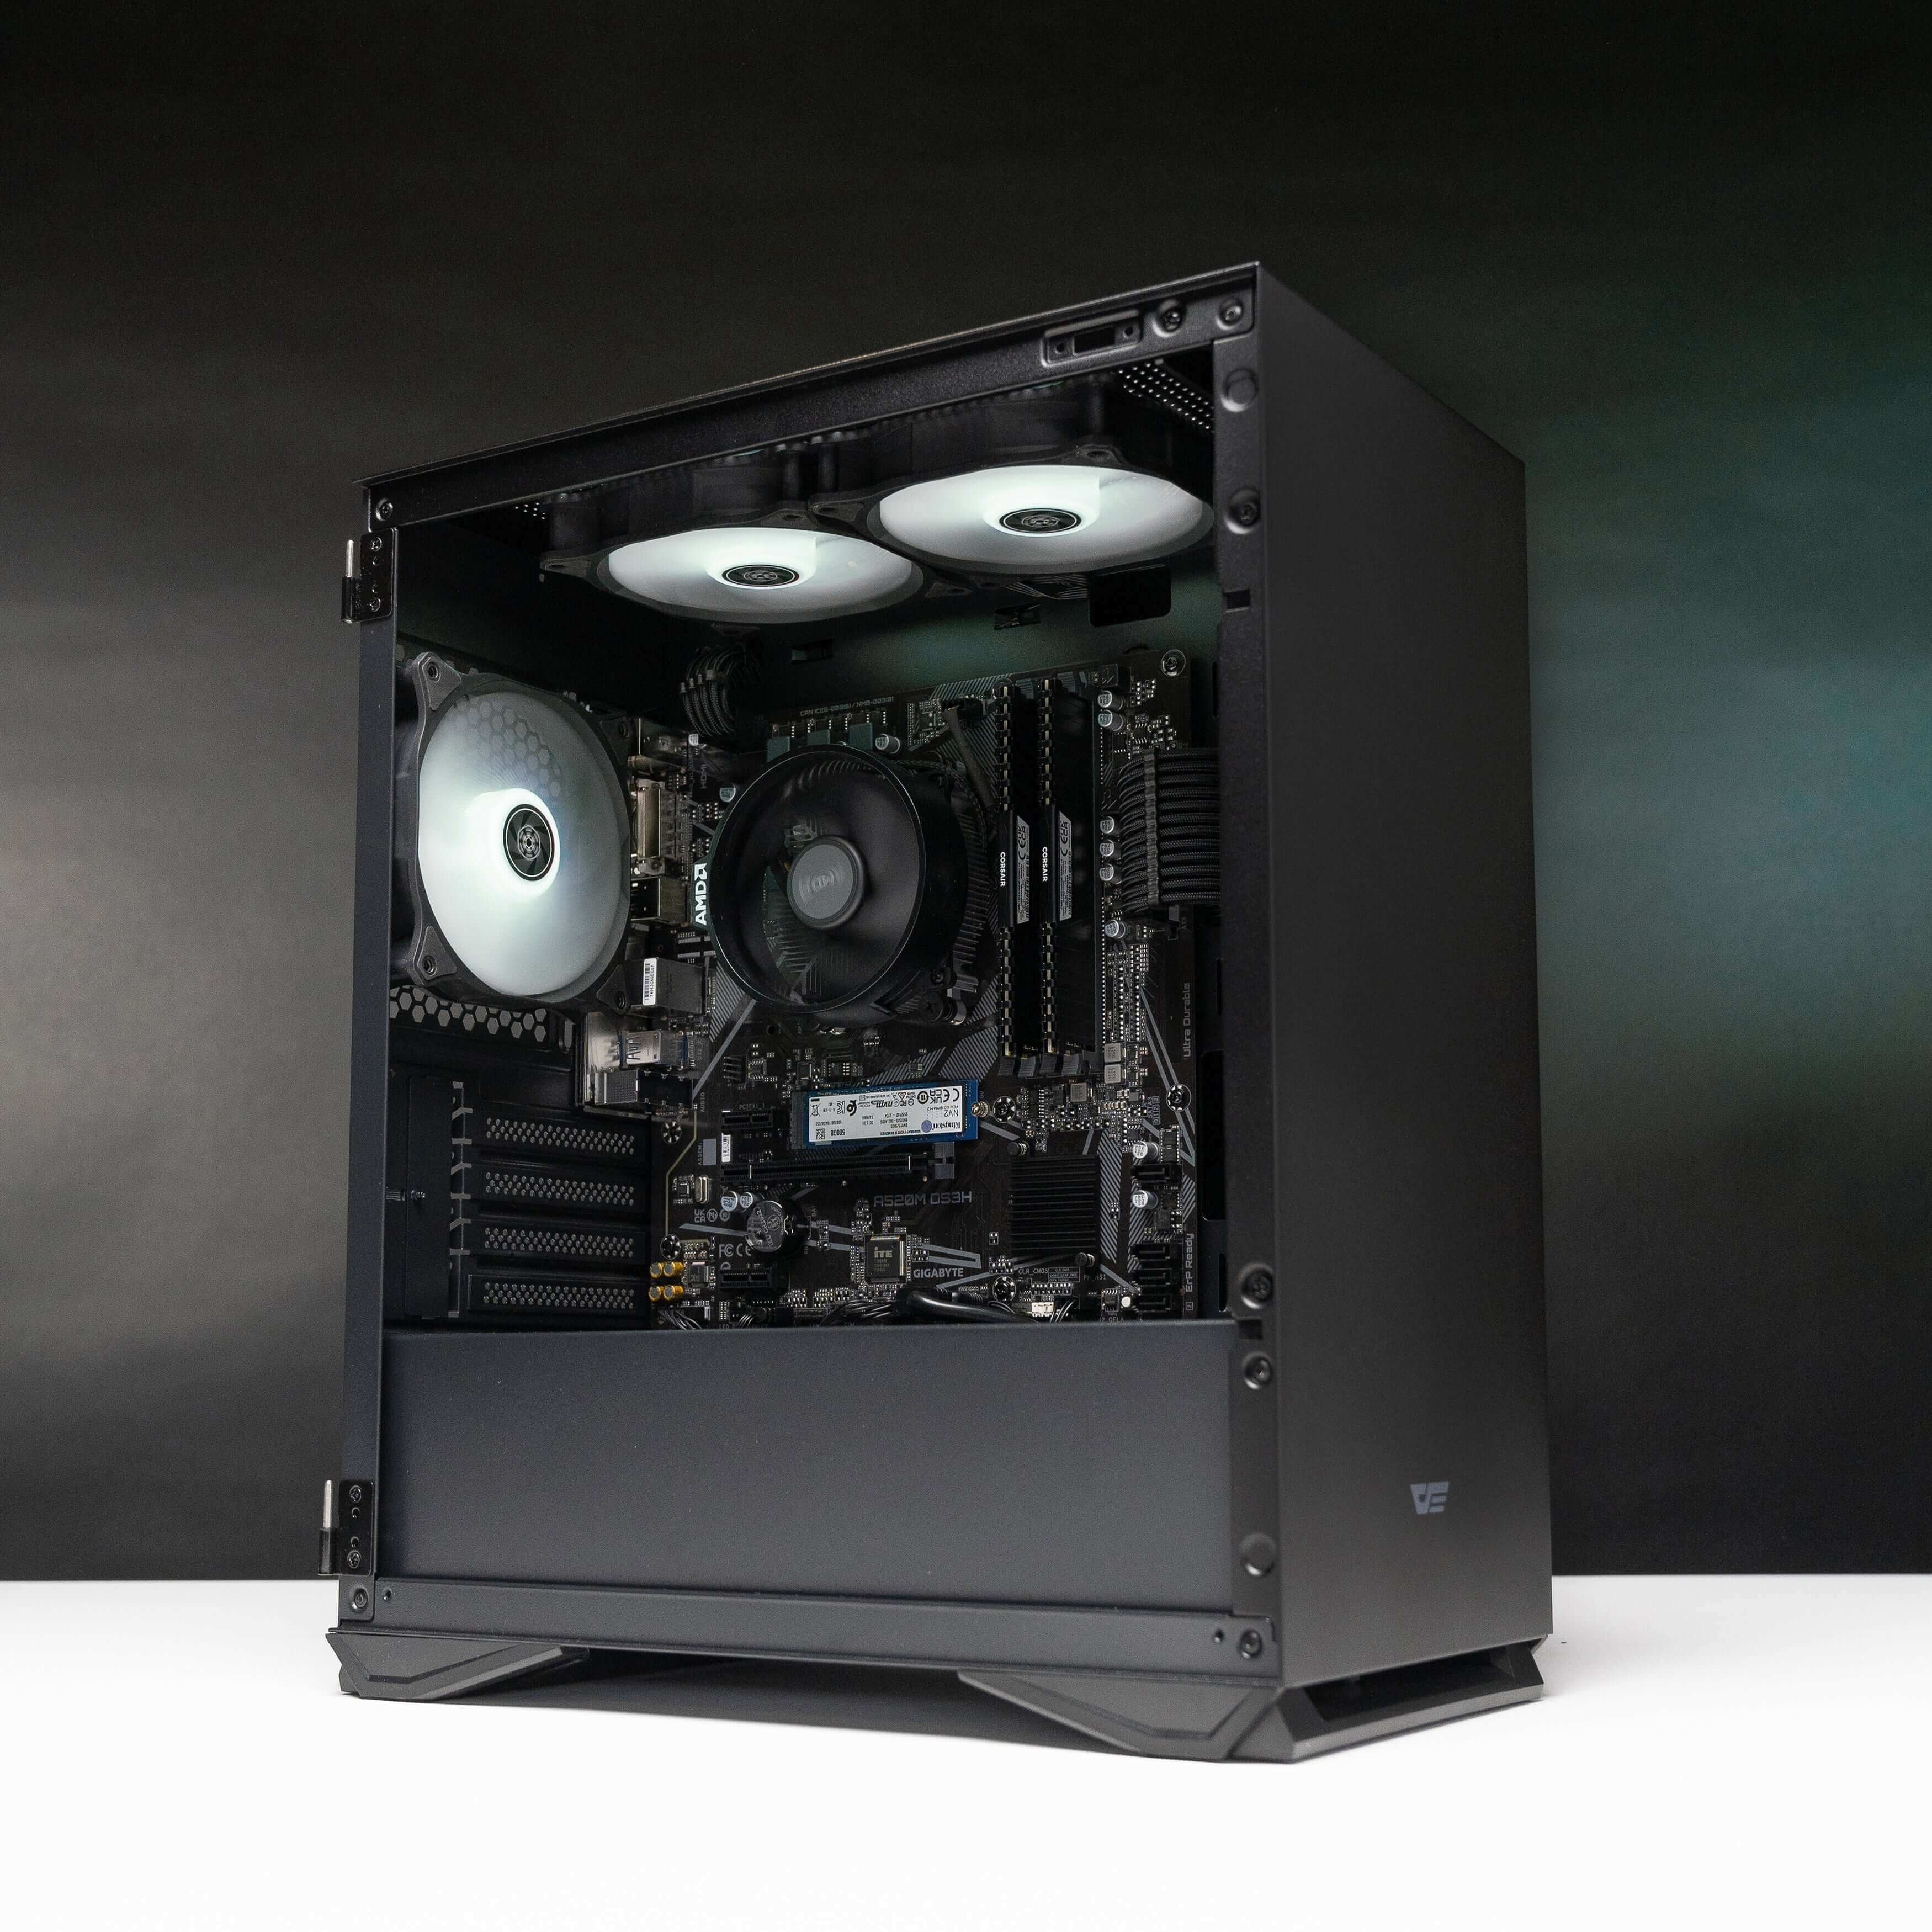 Side profile of the formidable Arrow LVL 12 Gaming PC, emanating power and performance